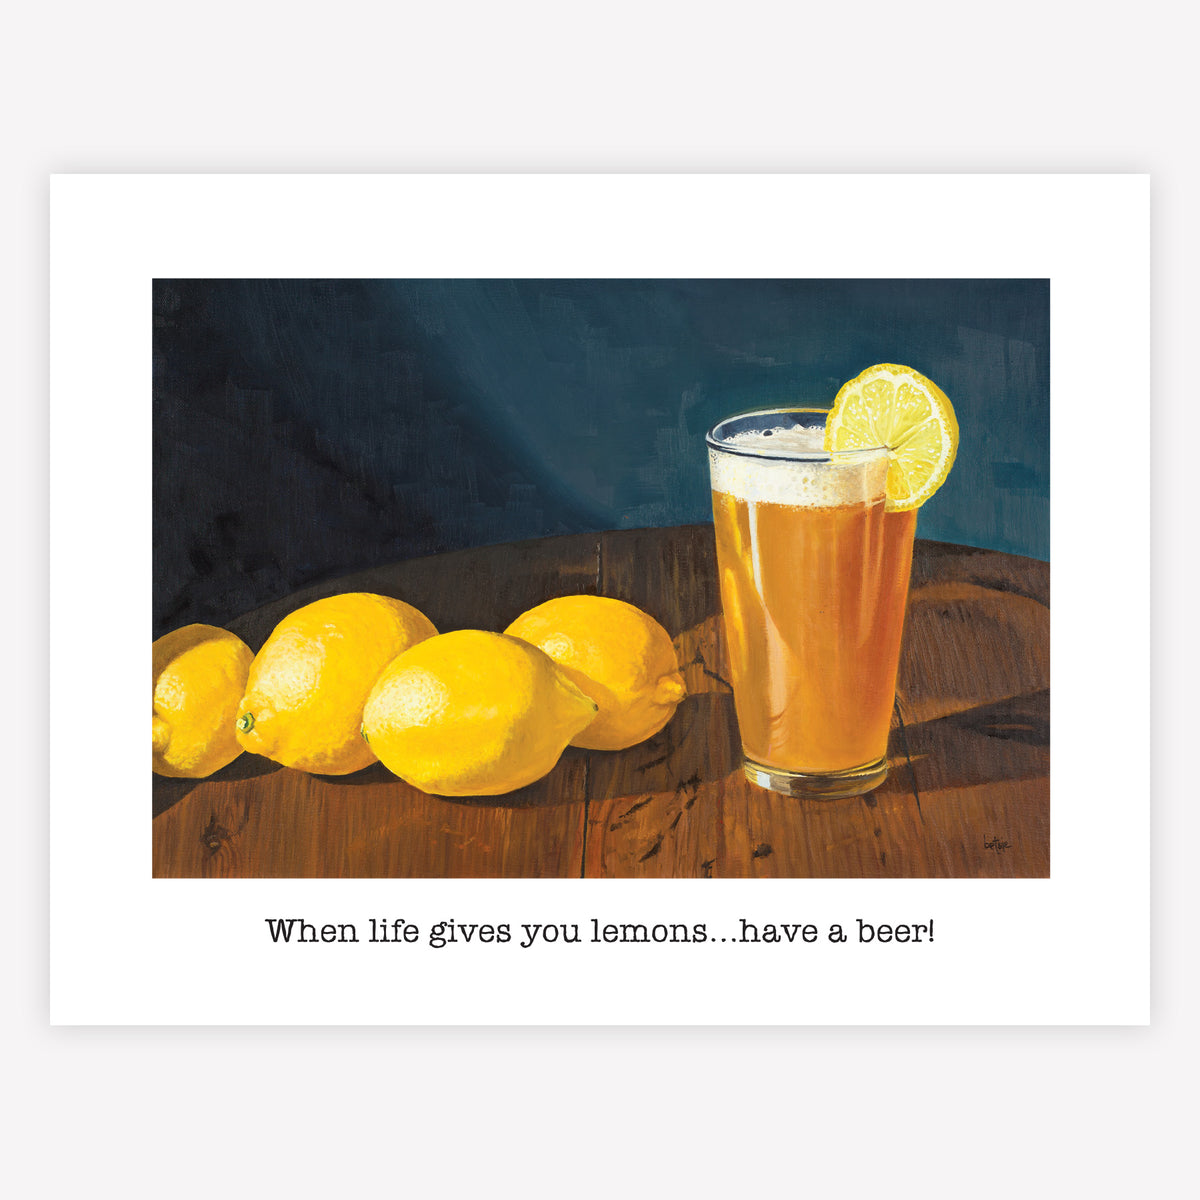 "When life gives you lemons...have a beer!" Greeting Card